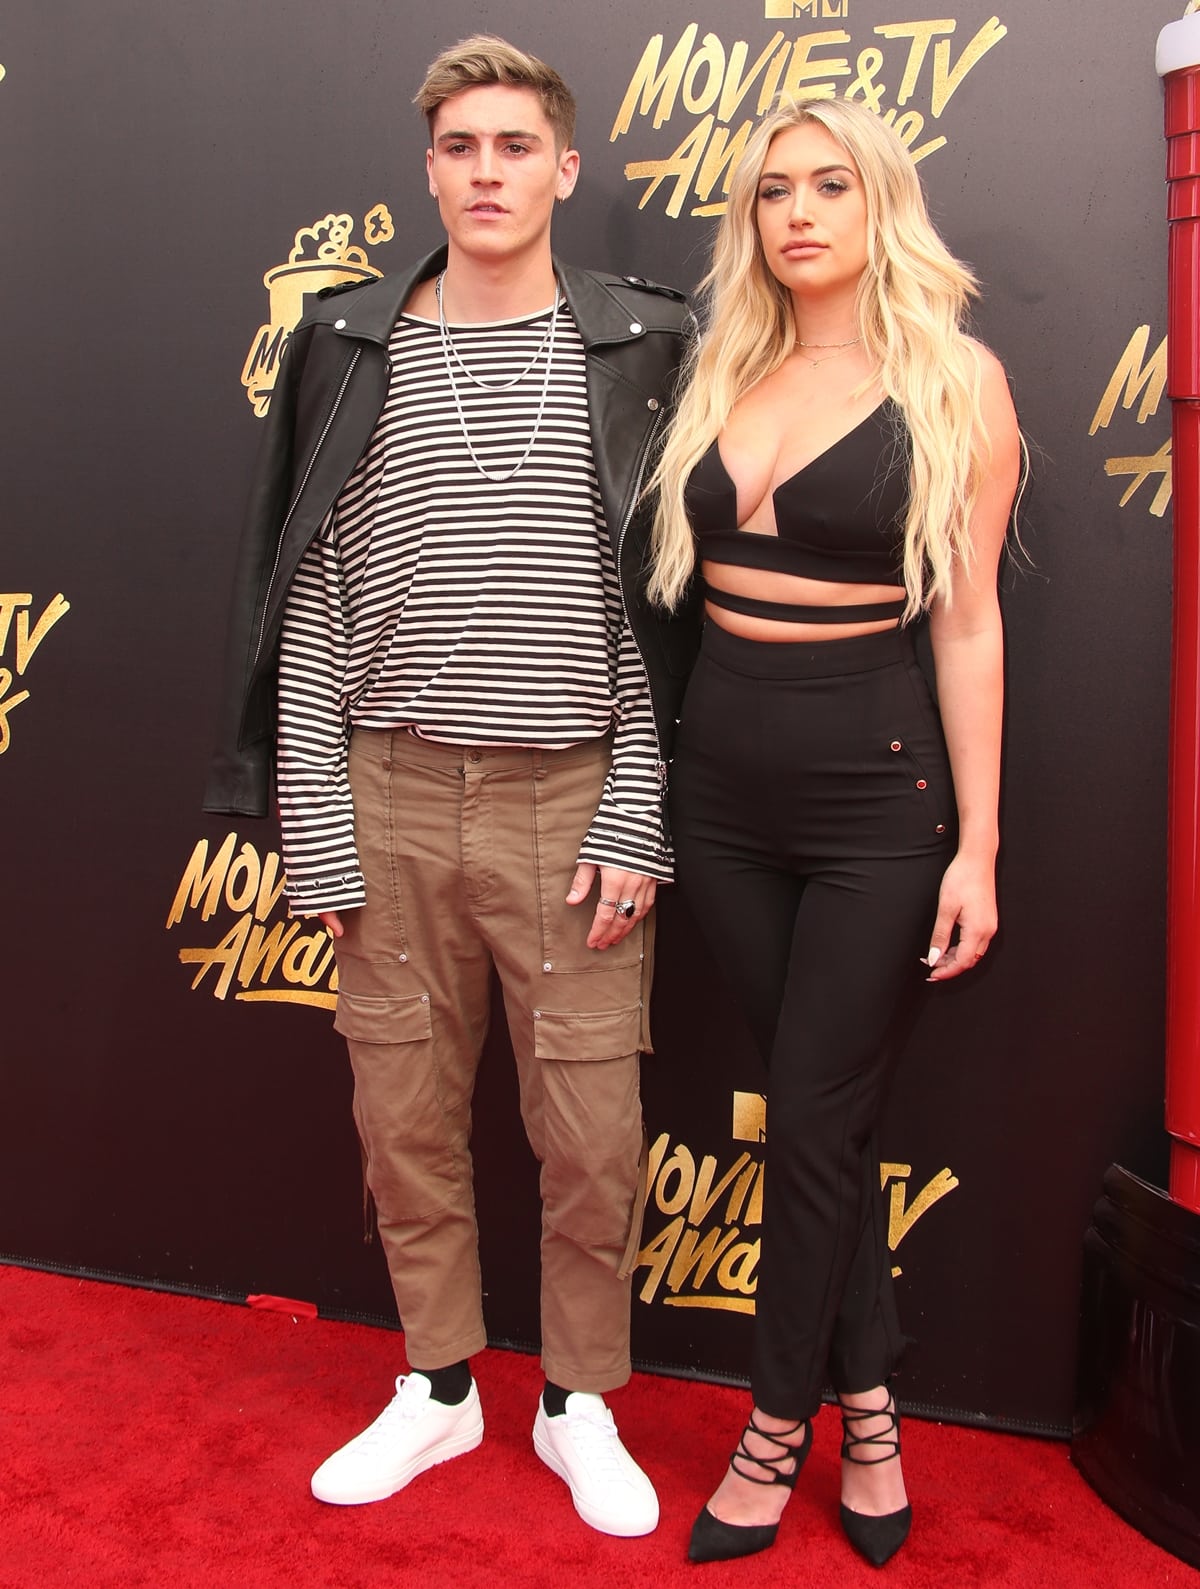 Anastasia Karanikolaou, a.k.a. Stassiebaby, started dating Vine star turned musician Sam Wilkinson in 2016 and they have remained friends after breaking up in 2017